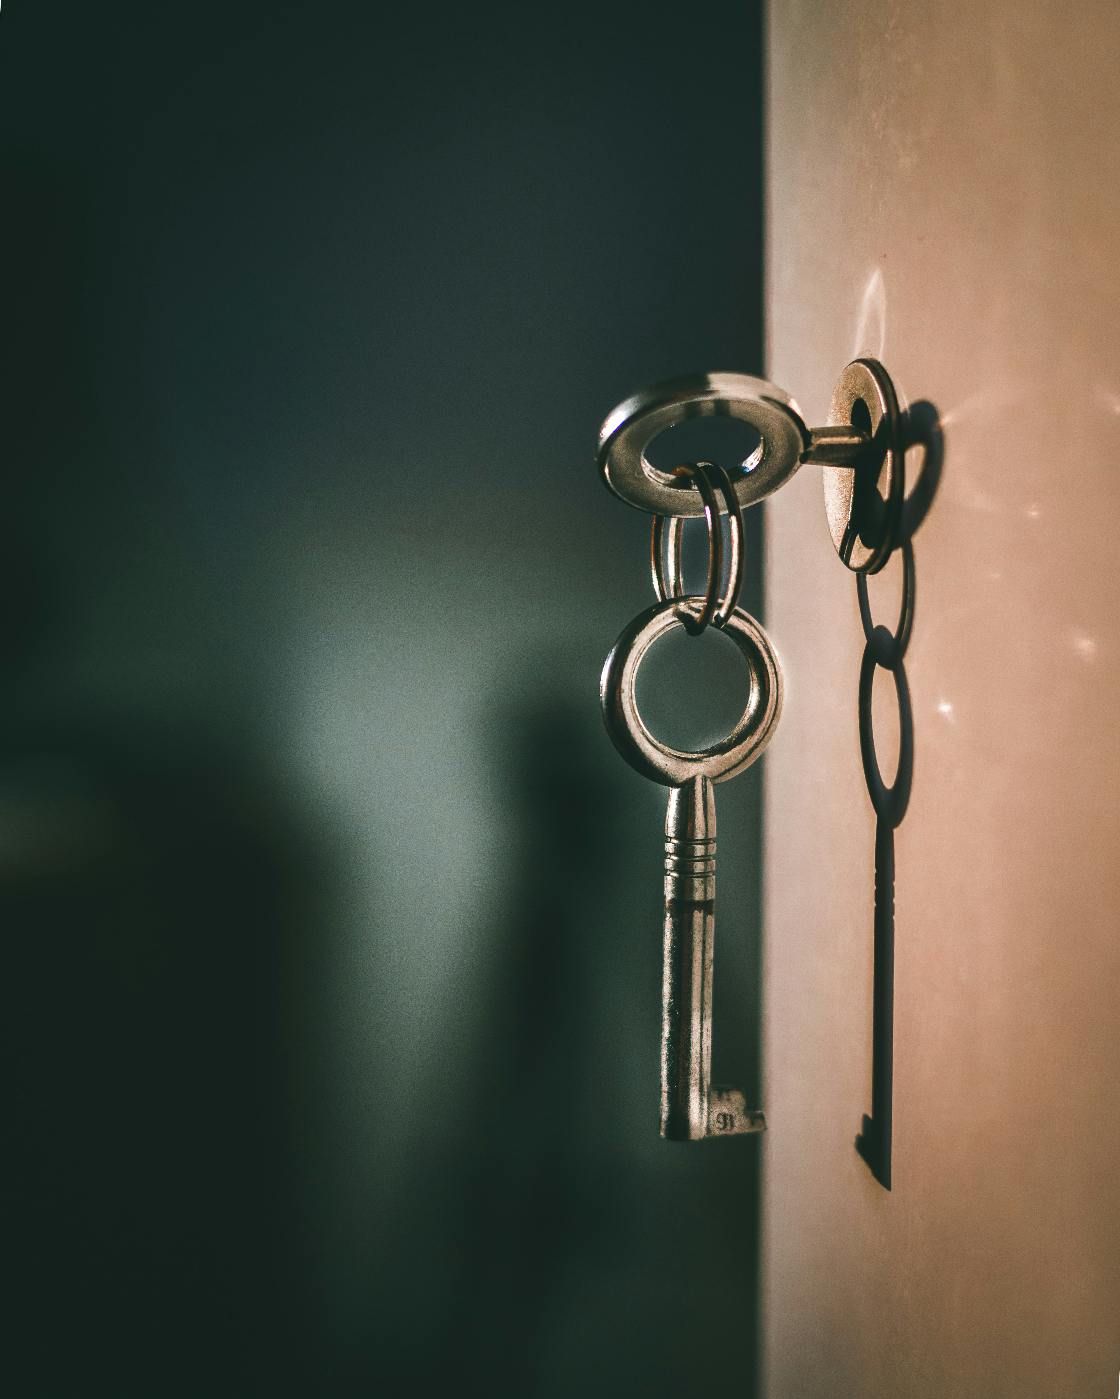 a skelteton key on a hook with its shadow on the wall